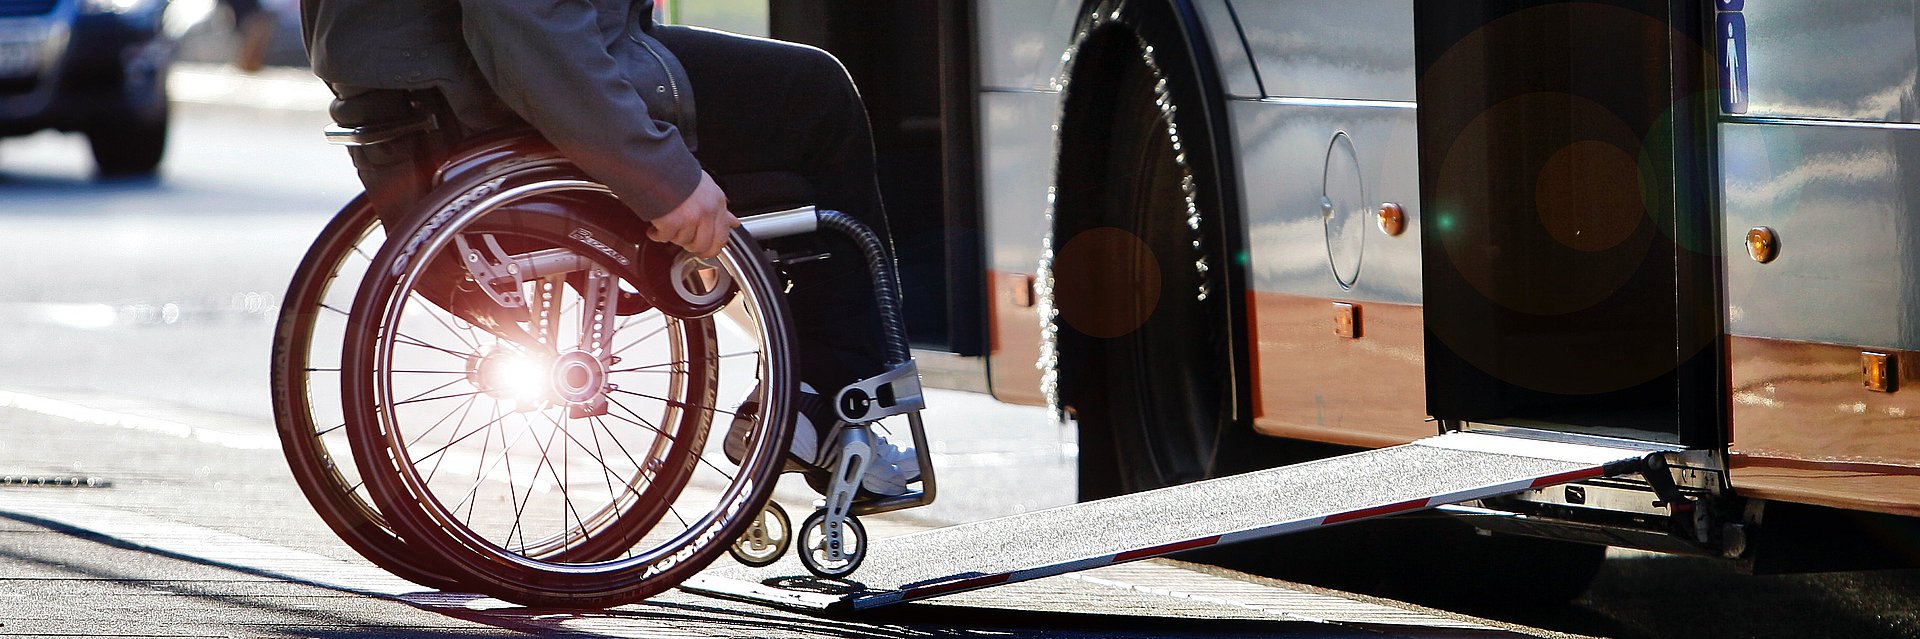 Picture of a person with wheelchair on a ramp entering a bus